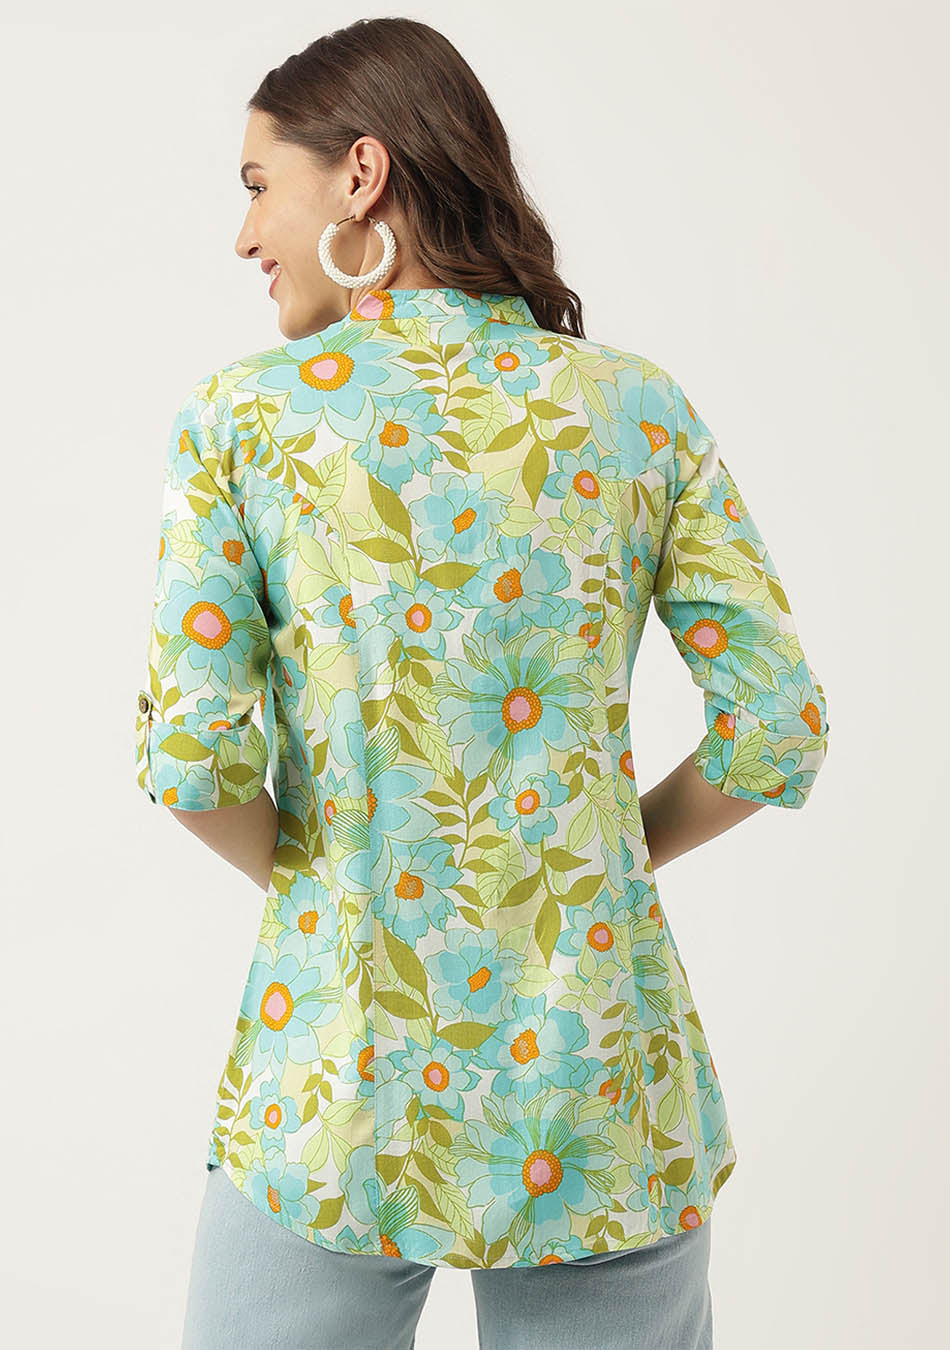 Green Floral Printed Rayon Shirt Style Top